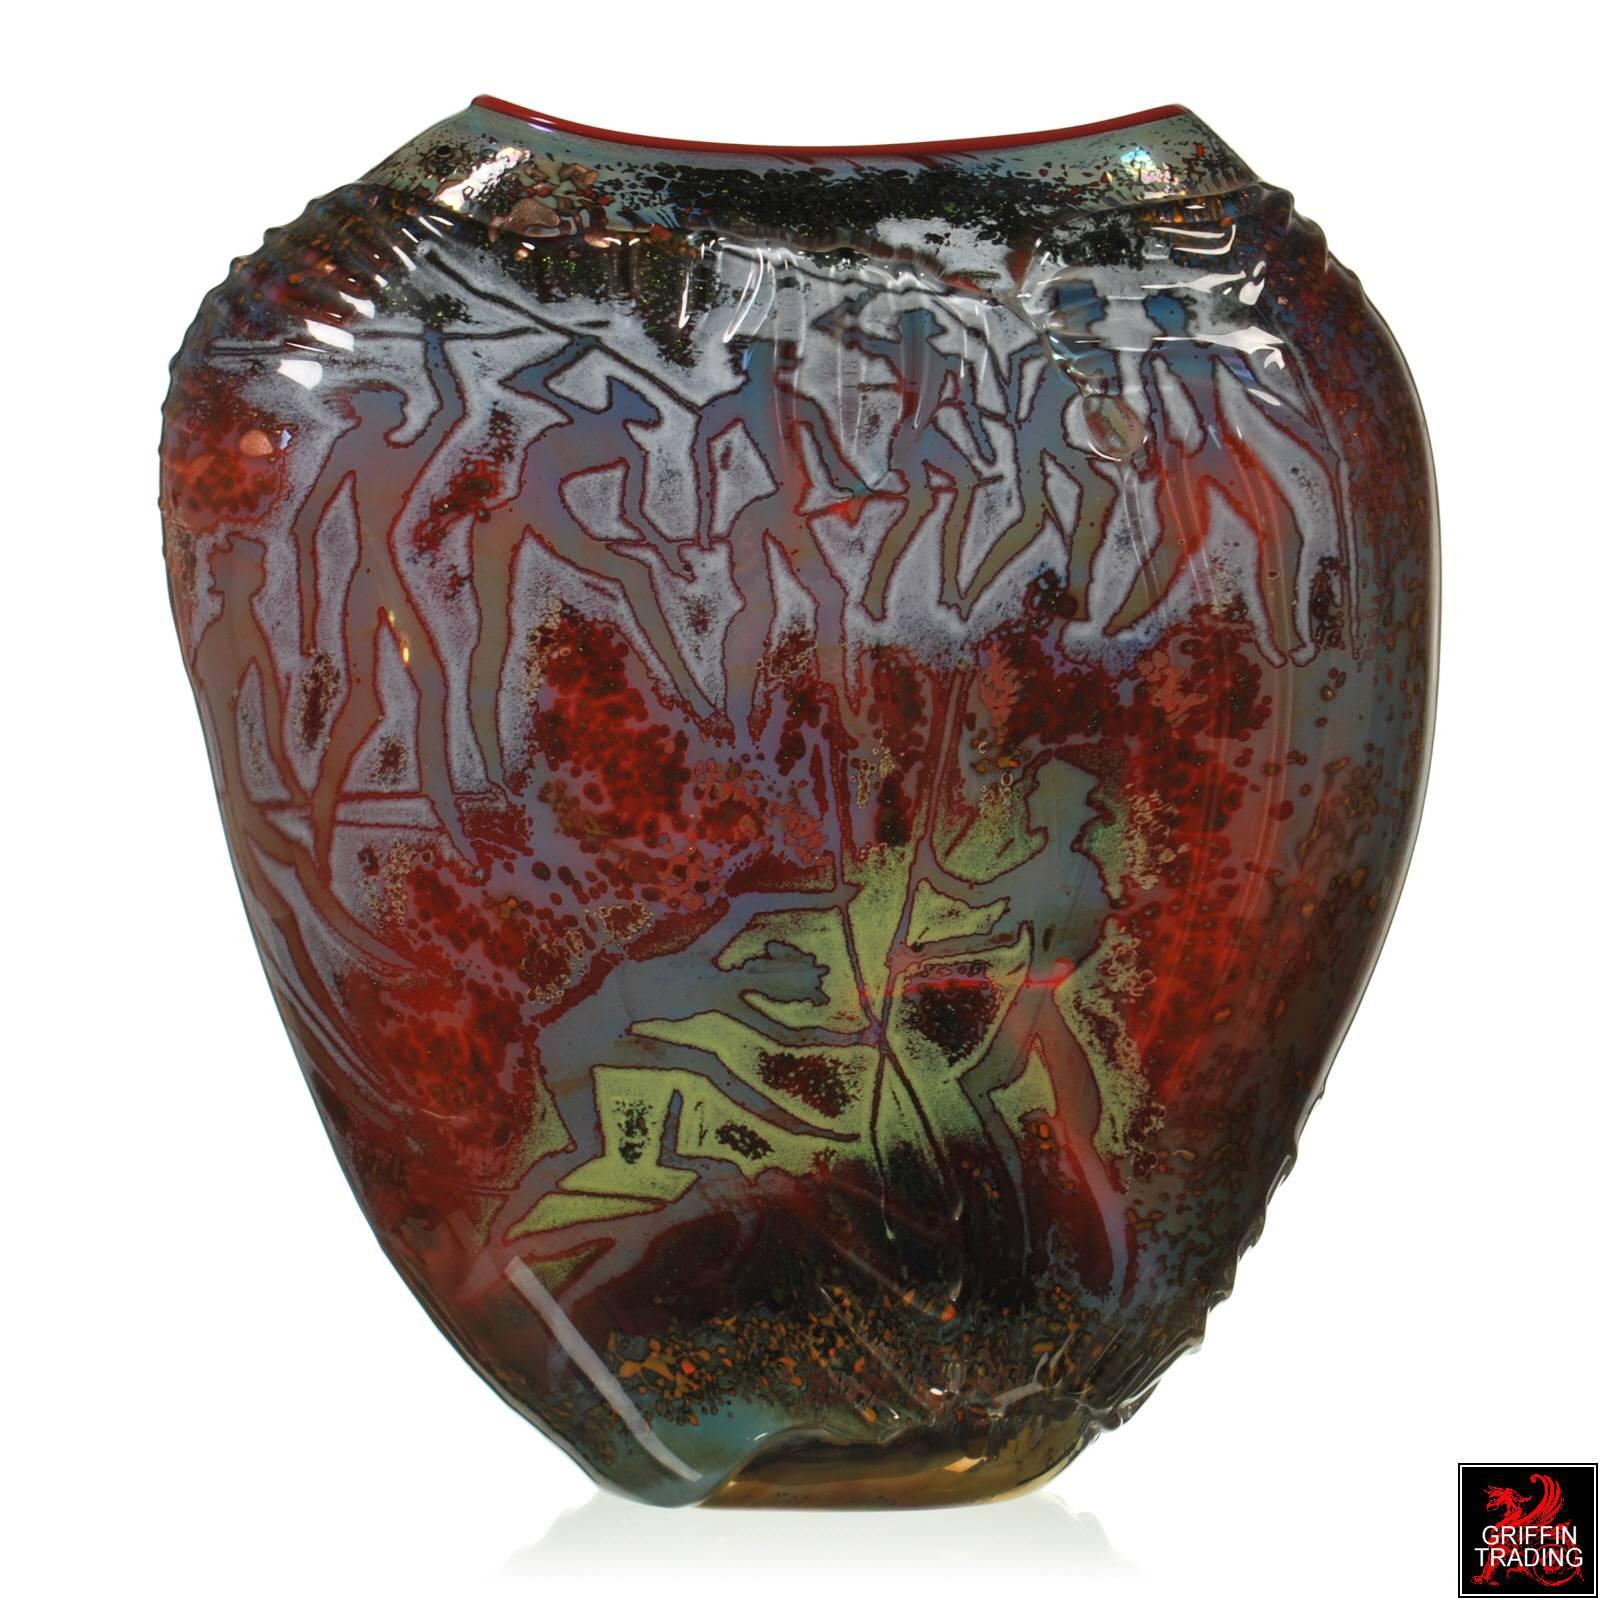 This monumental art glass vessel is the work of American glass artist William Morris. Part of his Petroglyph series done in the 1980′s, this striking art glass vase is decorated with various forms of tribal petroglyphs. Emblazoned with primitive